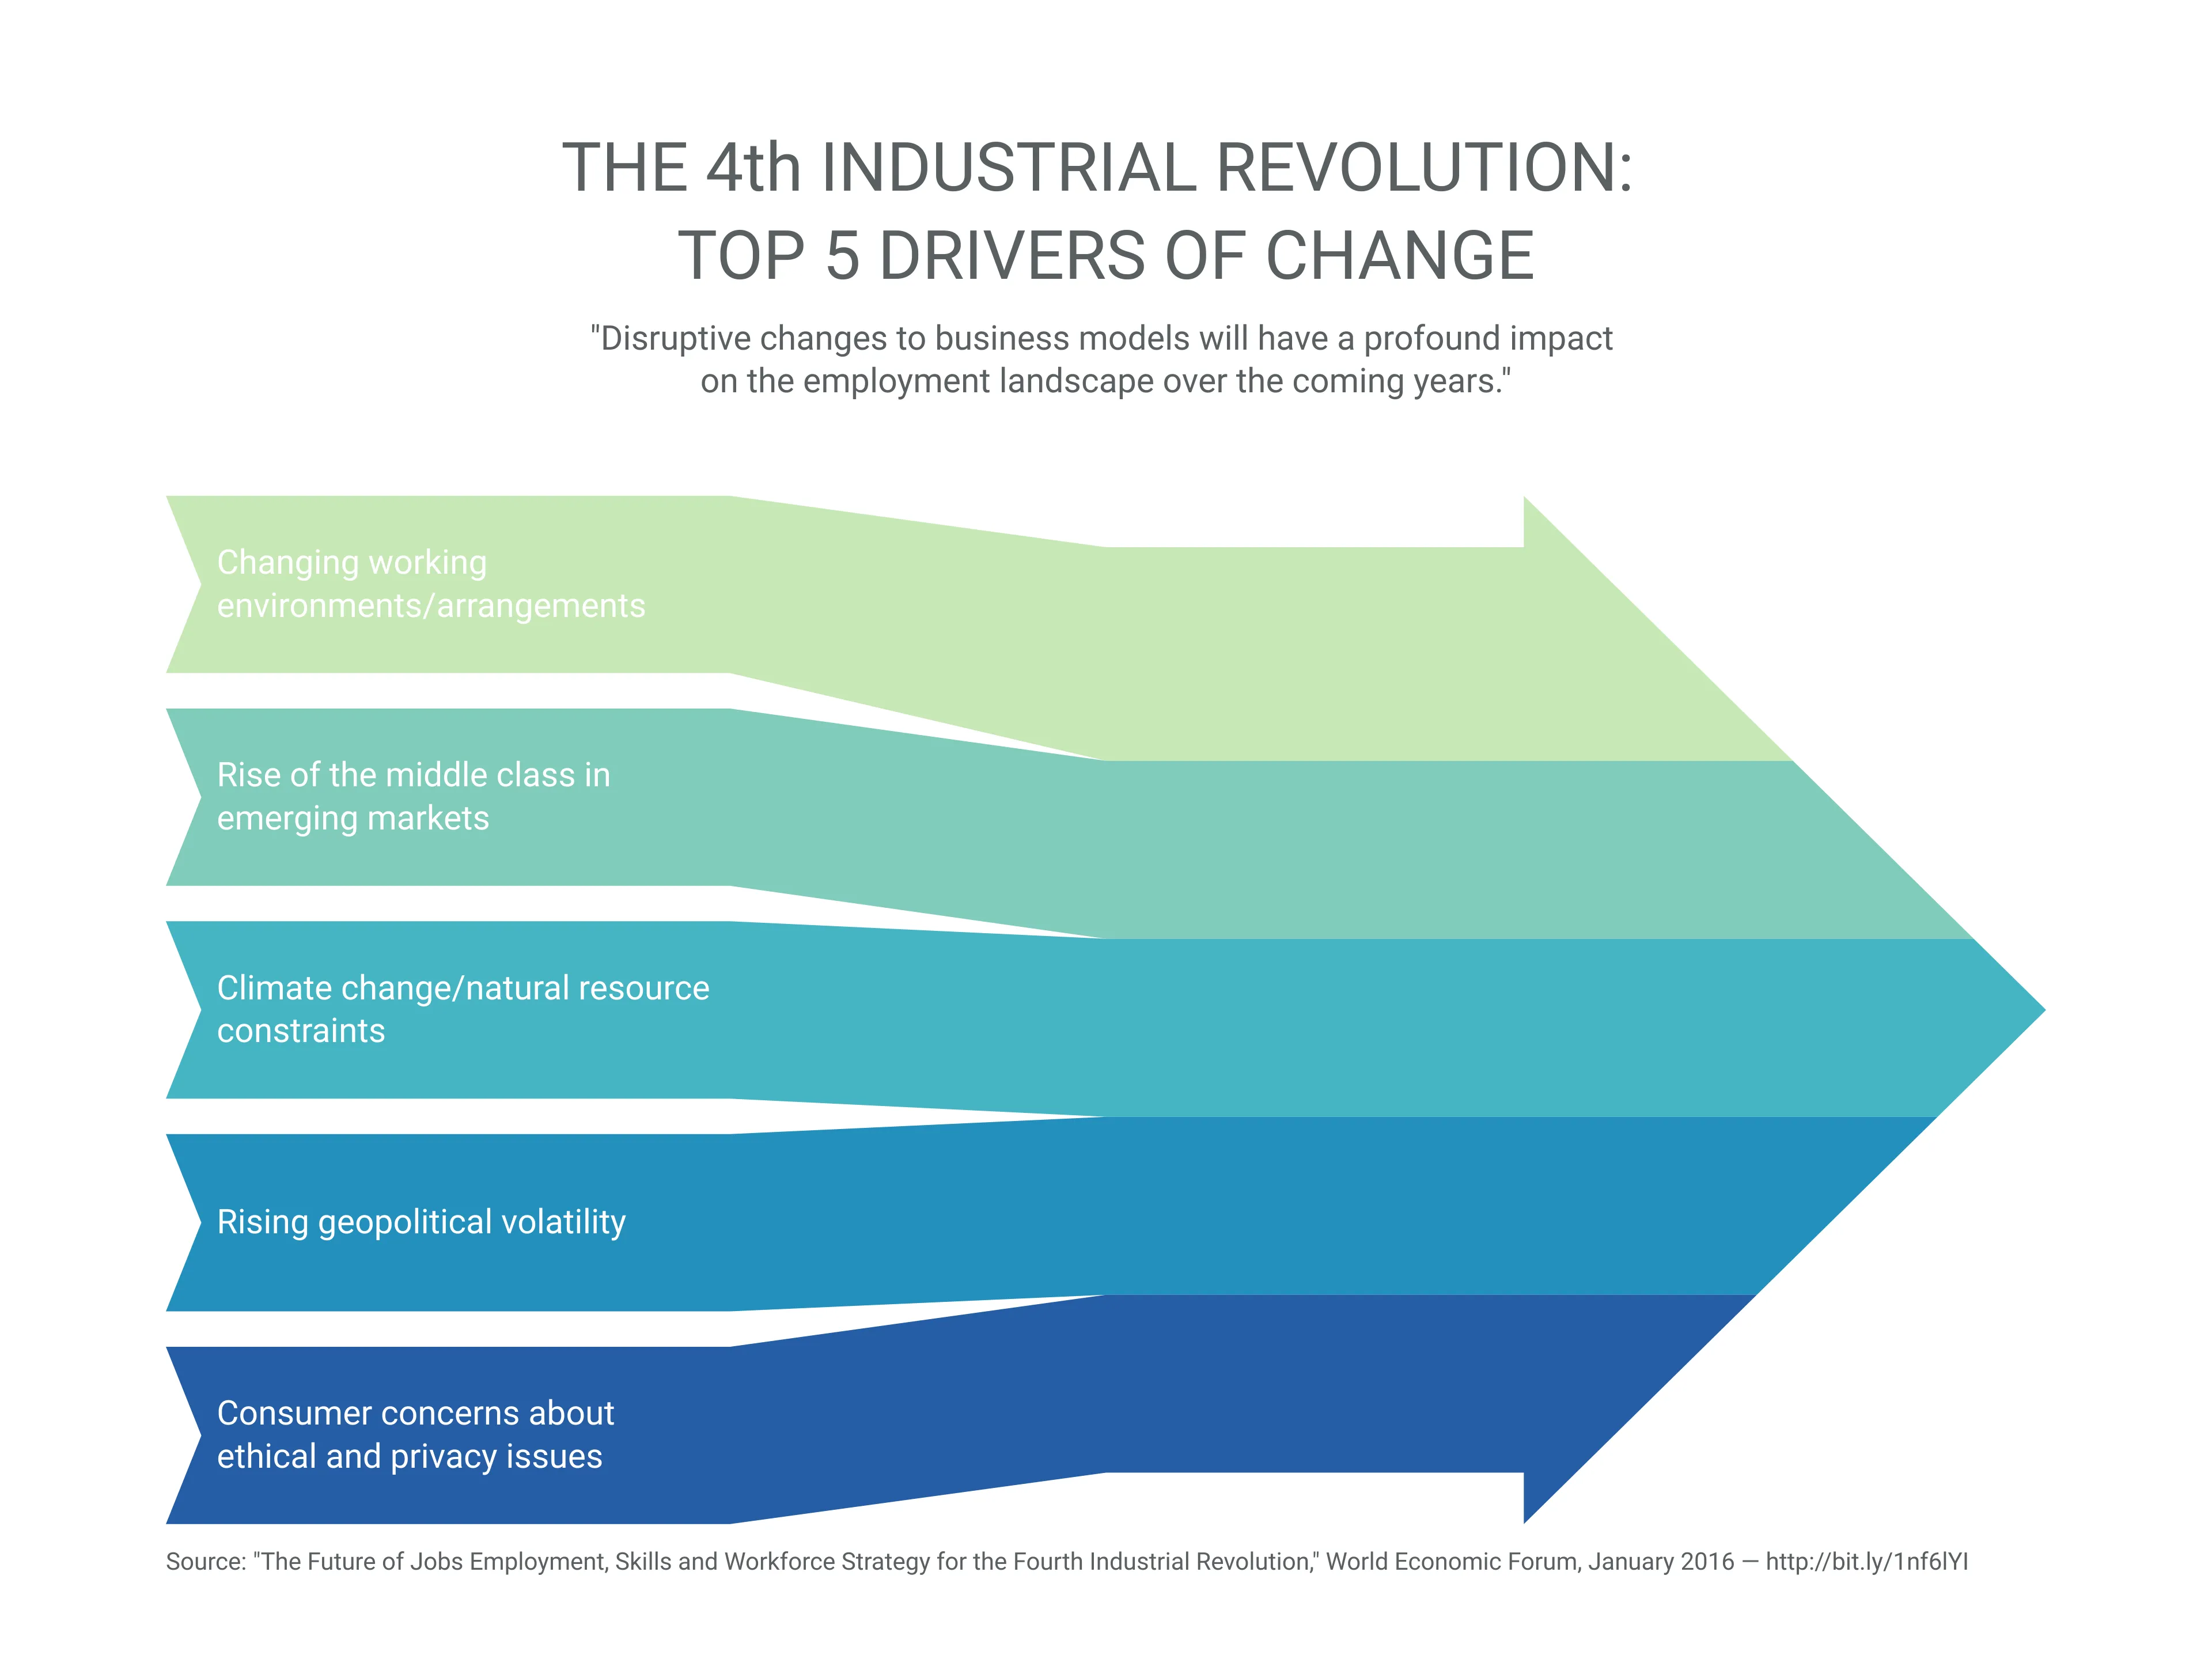 THE 4th INDUSTRIAL REVOLUTION:  TOP 5 DRIVERS OF CHANGE